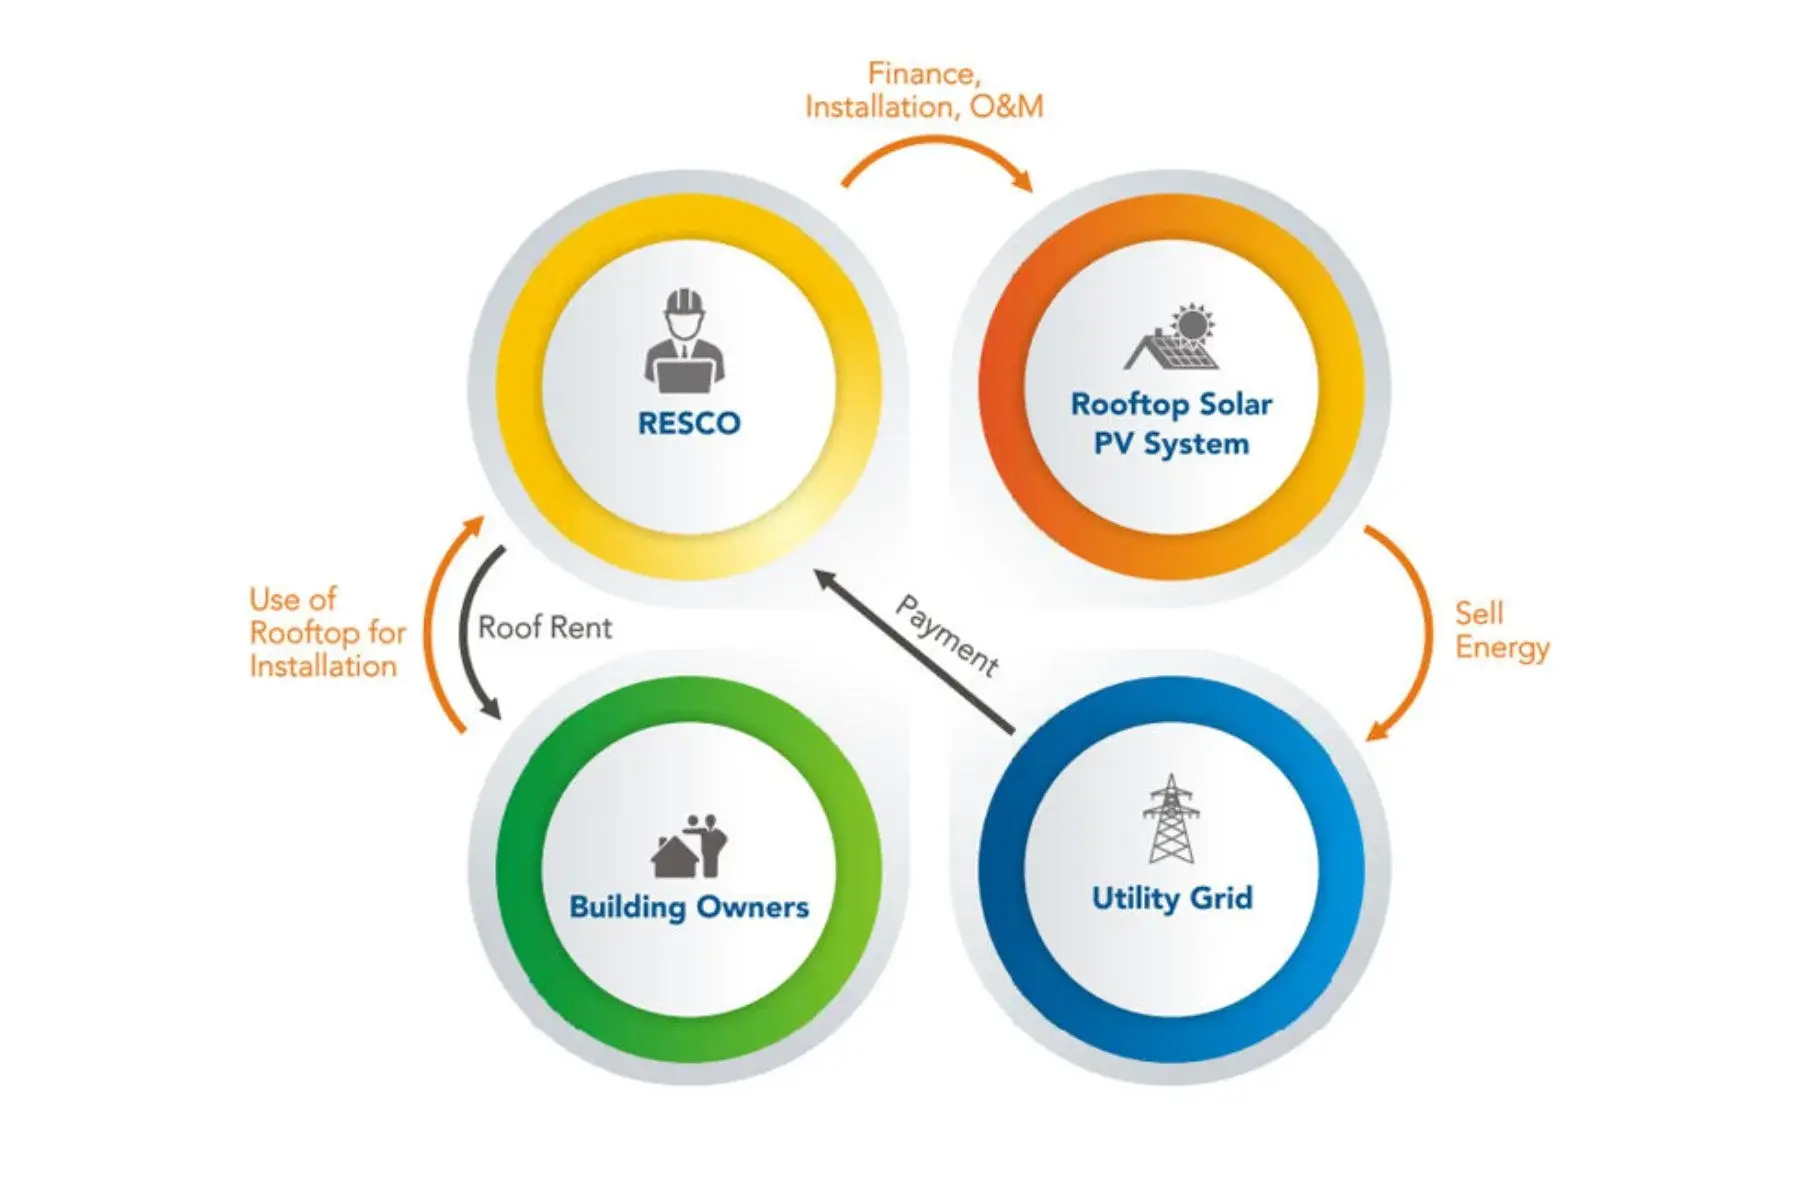 OPEX Models for Solar Adoption in Pharma companies